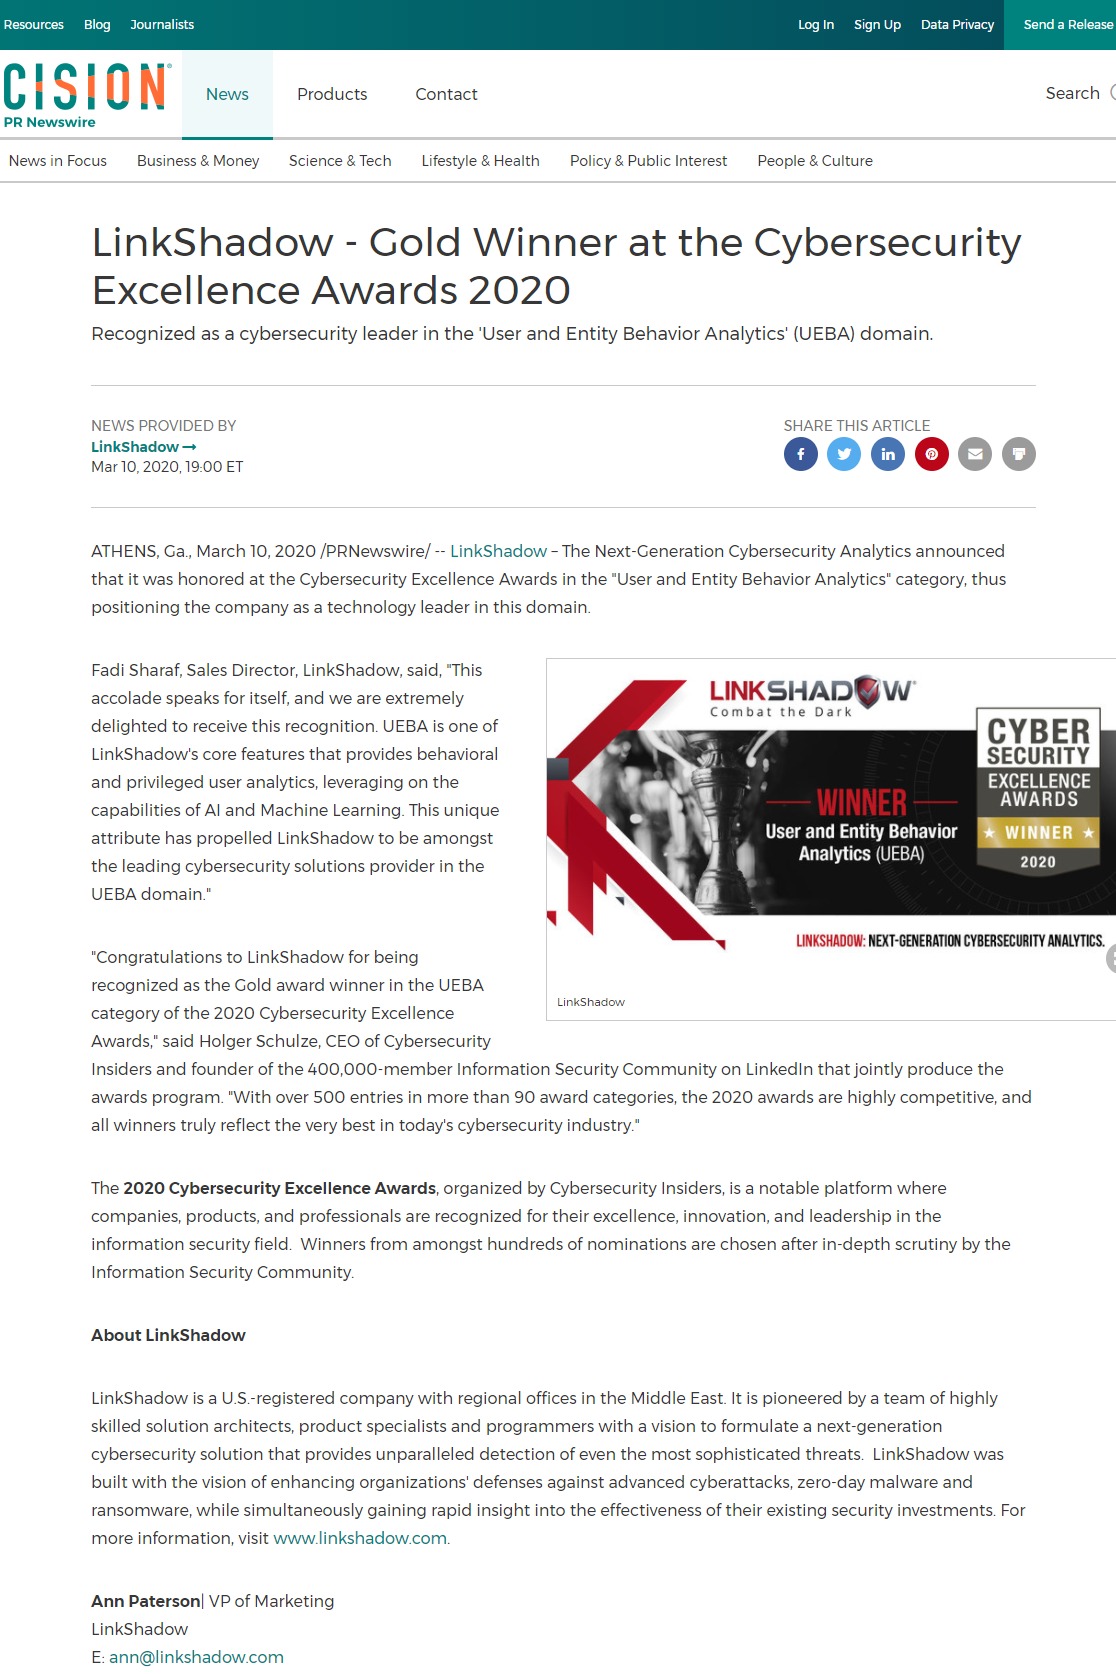 LinkShadow - Gold Winner at the Cybersecurity Excellence Awards 2020